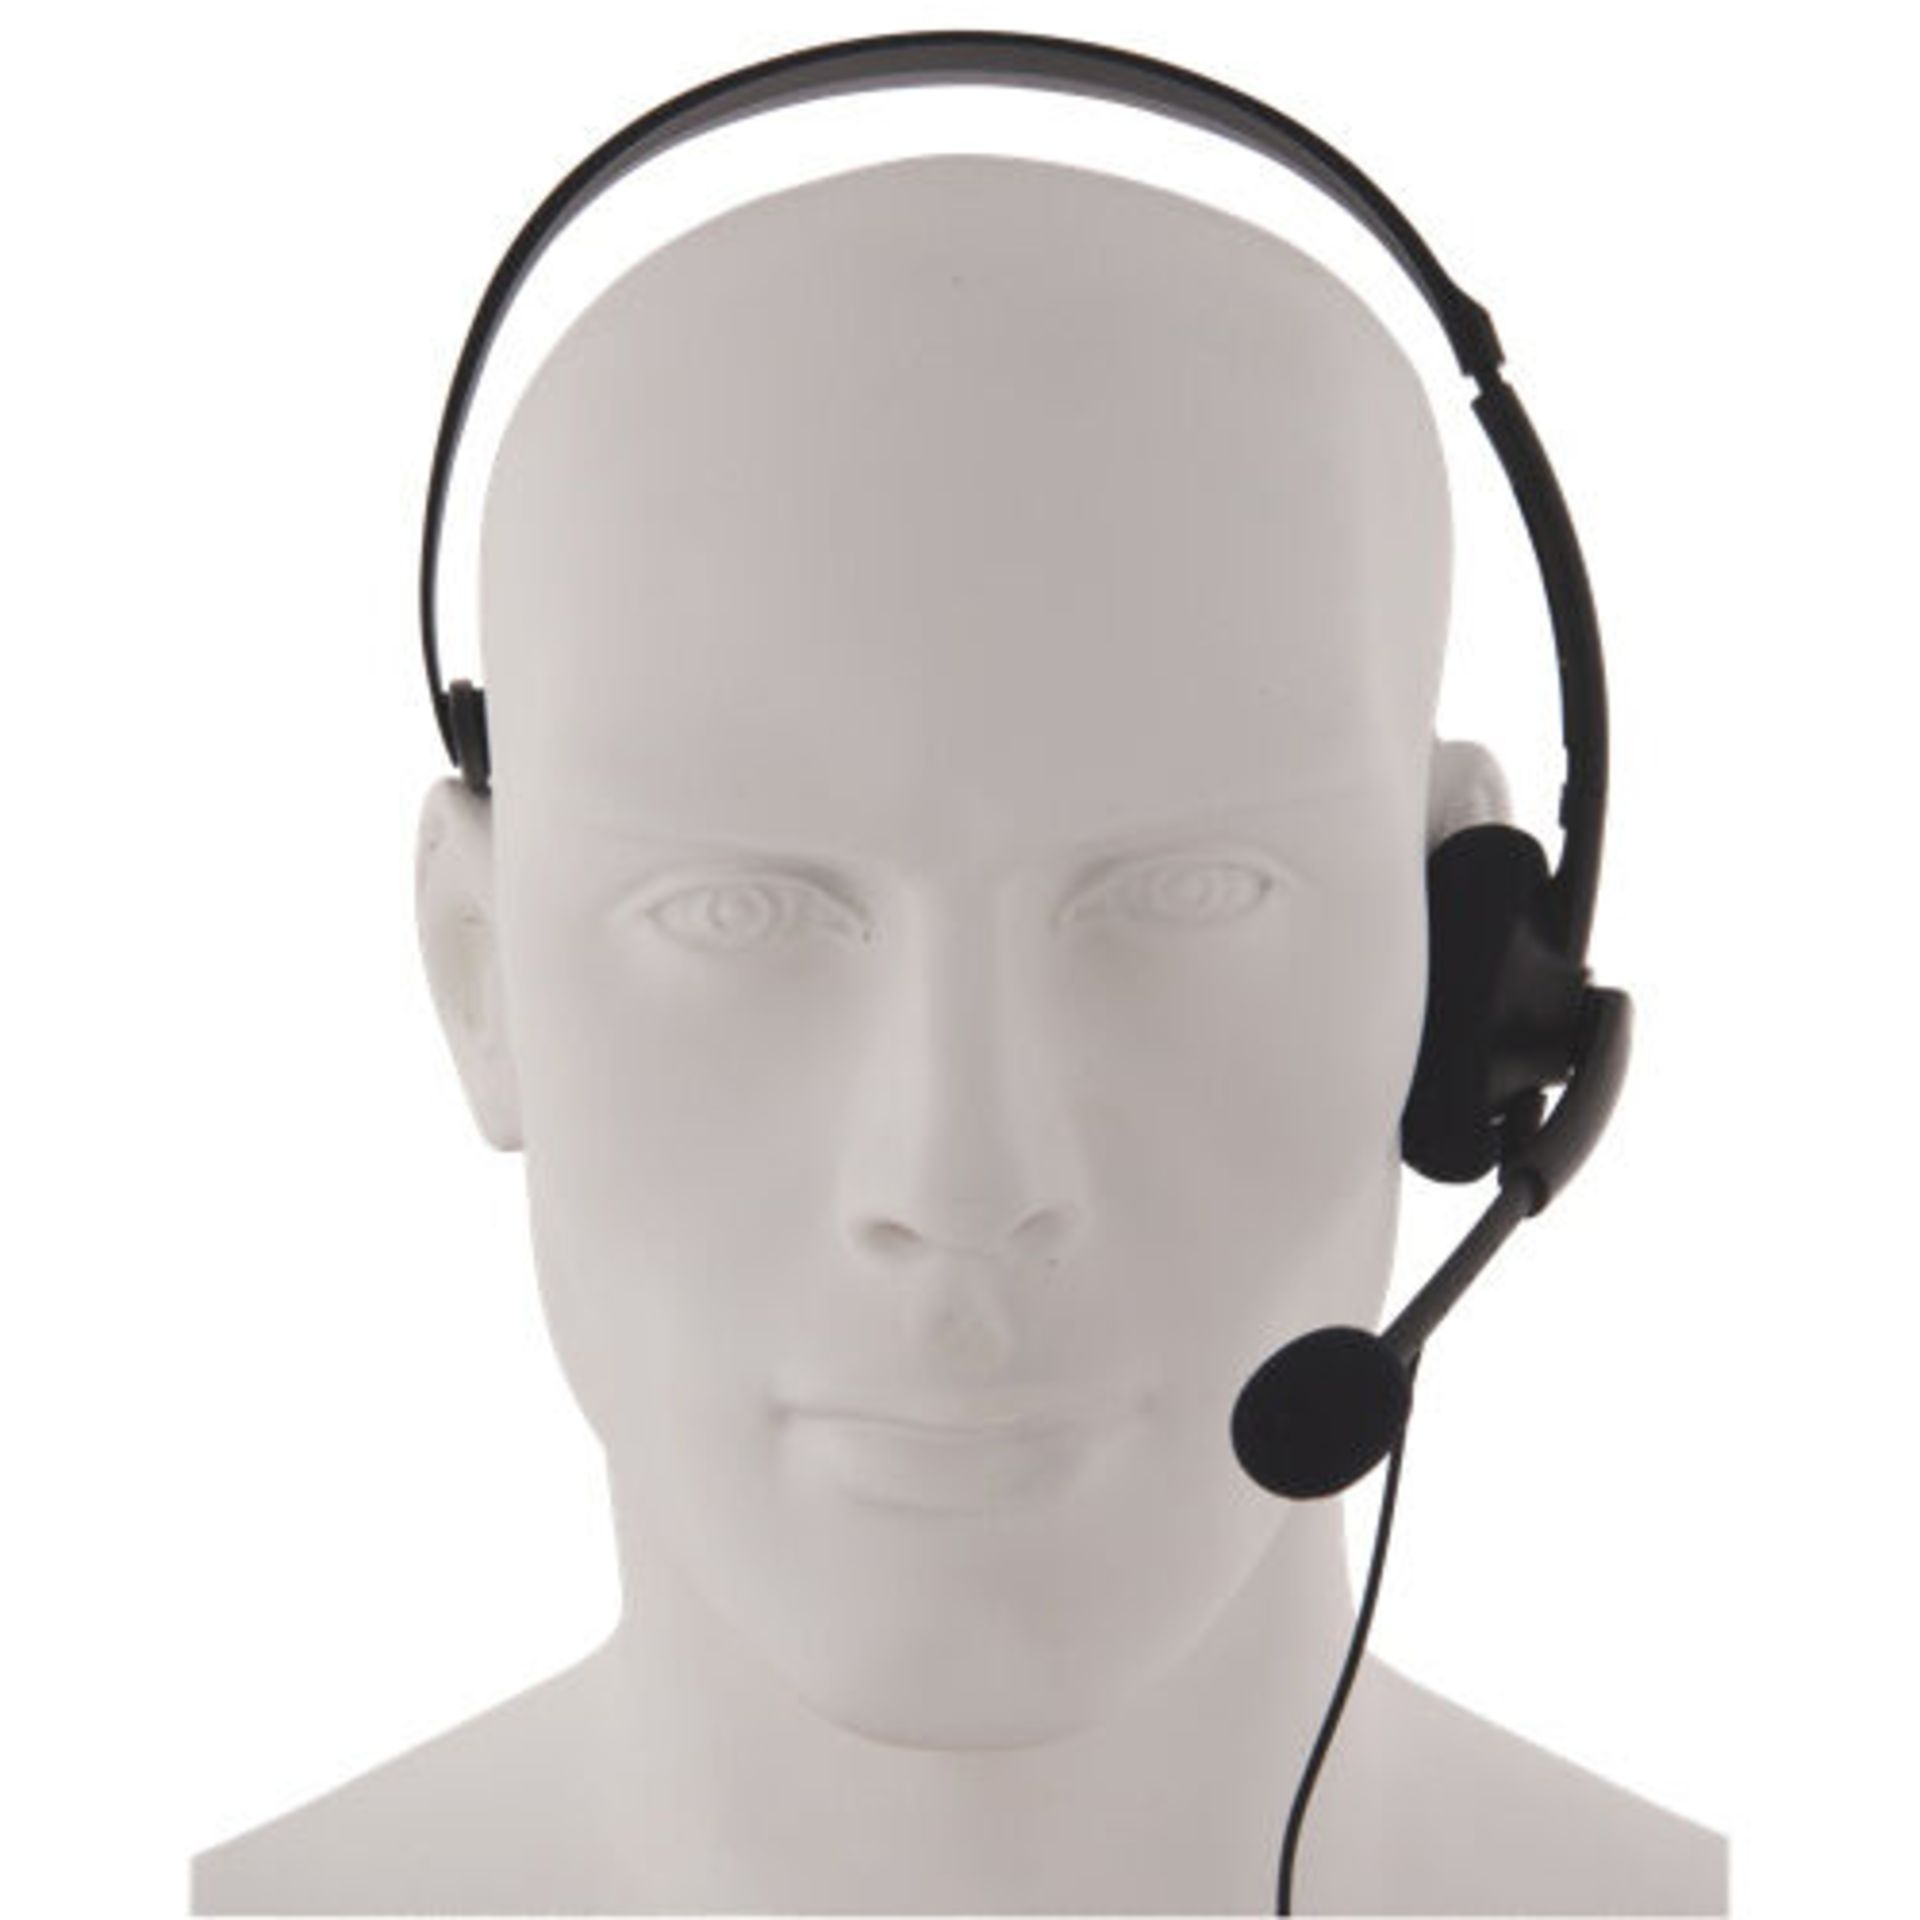 JOBLOT 500 X NEW OFFICIAL XBOX 360 LIVE ONLINE CHAT HEADSET WITH MIC GAMING HEADPHONES 2.5MM AUX - Image 2 of 6